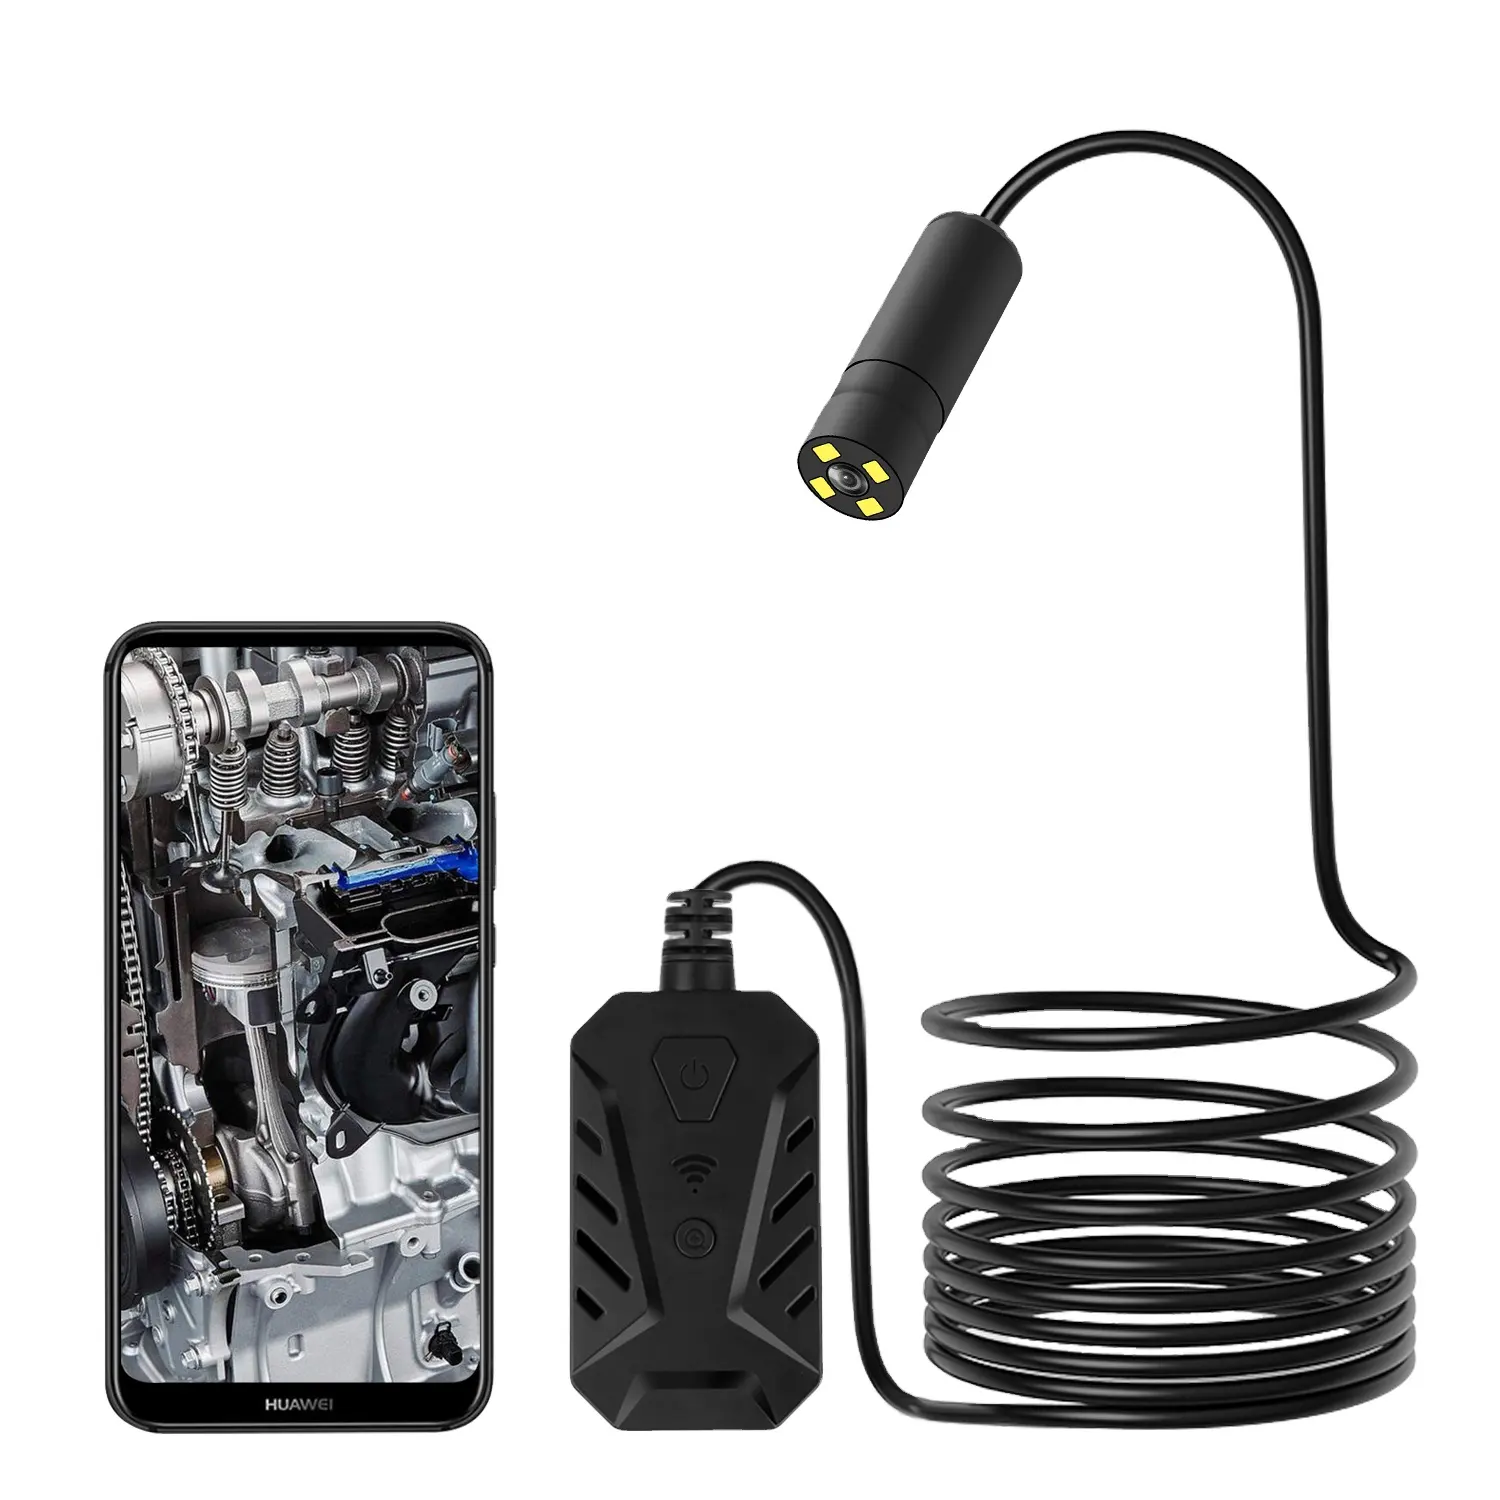 1080p camera with 8 led Auto focus driver usb camera inspection wireless wifi inspection camera 5 meters wireless endoscope